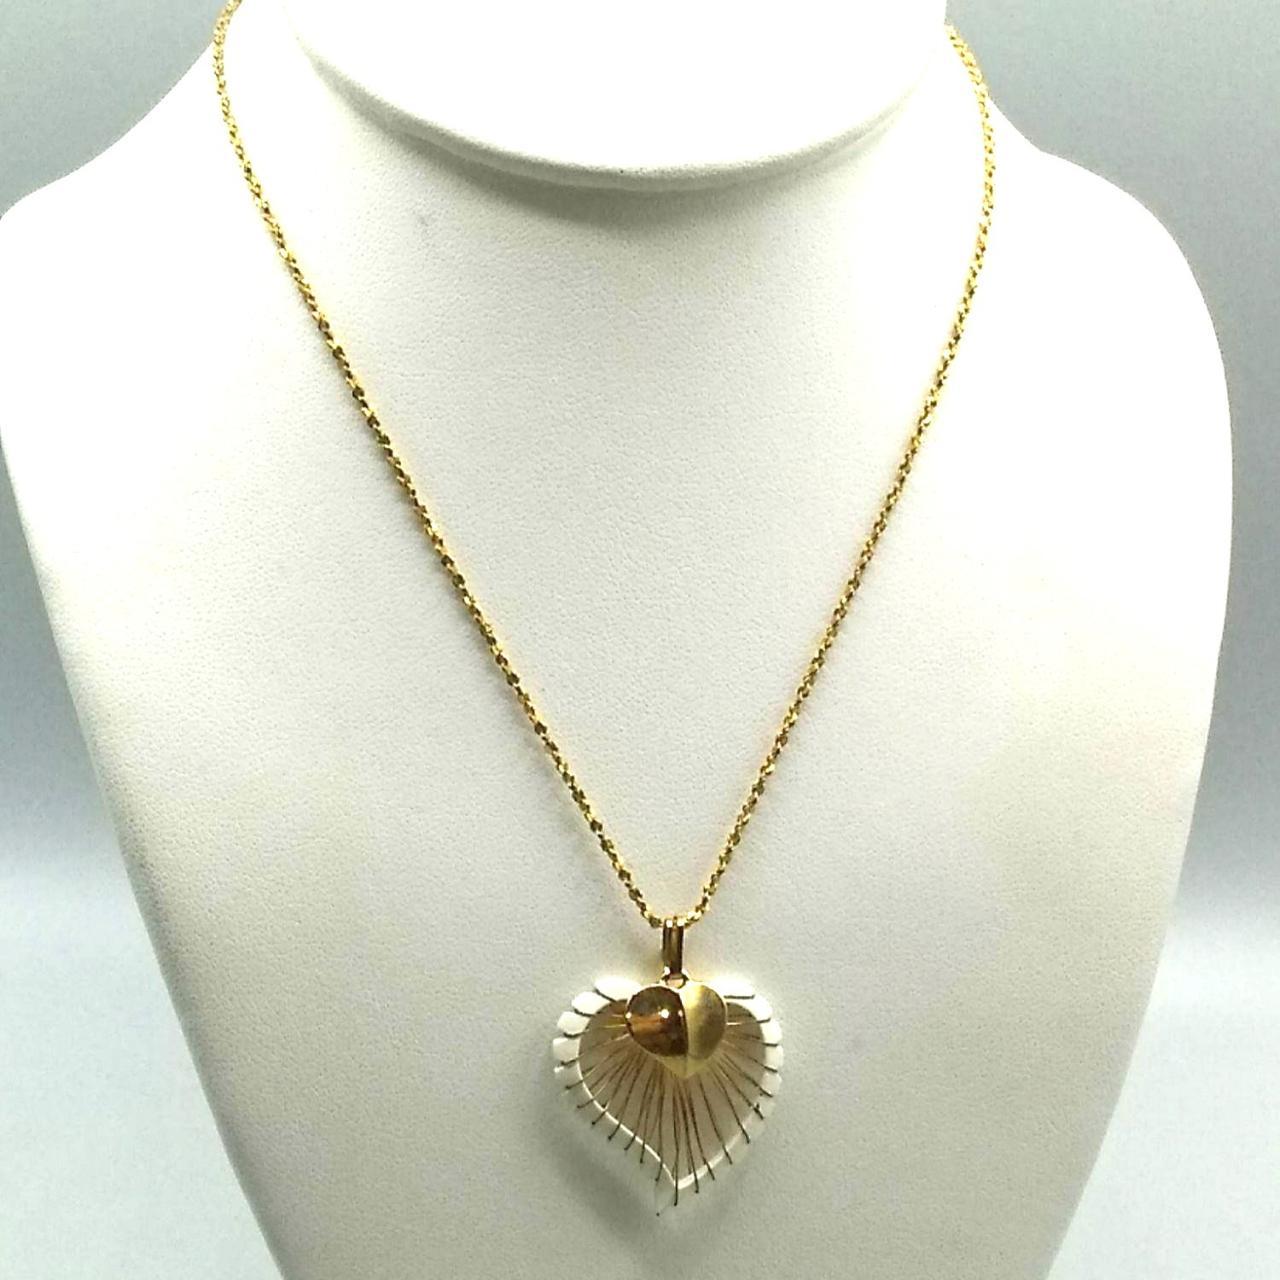 Vintage Monet Necklace Puffed Heart Pendant Yellow Gold Tone Heart Jewelry  Collectible Costume Jewelry Unique Vintage Jewelry Gift for Her - Etsy